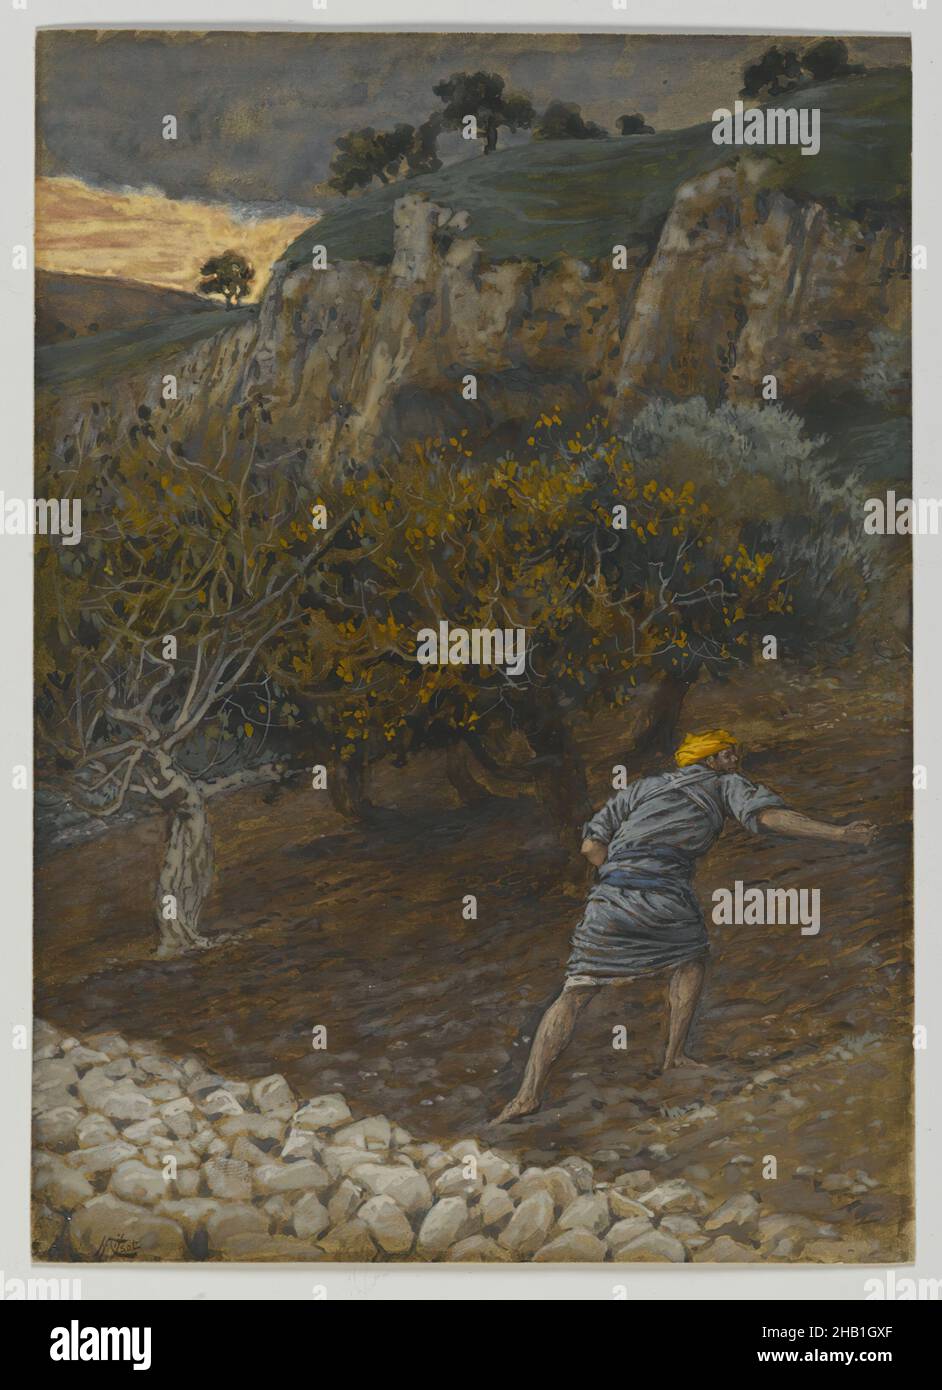 The Enemy Who Sows, L'Ennemi qui sème, The Life of Our Lord Jesus Christ, La Vie de Notre-Seigneur Jésus-Christ, James Tissot, French, 1836-1902, Opaque watercolor over graphite on gray wove paper, France, 1886-1894, Image: 8 3/8 x 6 in., 21.3 x 15.2 cm, Bible, Biblical, Catholicism, Christianity, color, danger, evil, French, French artist, graphite, James, landscape, Matthew 13:24-30, mountains, New Testament, Religion, religious, sows, Tissot, trees, water Stock Photo